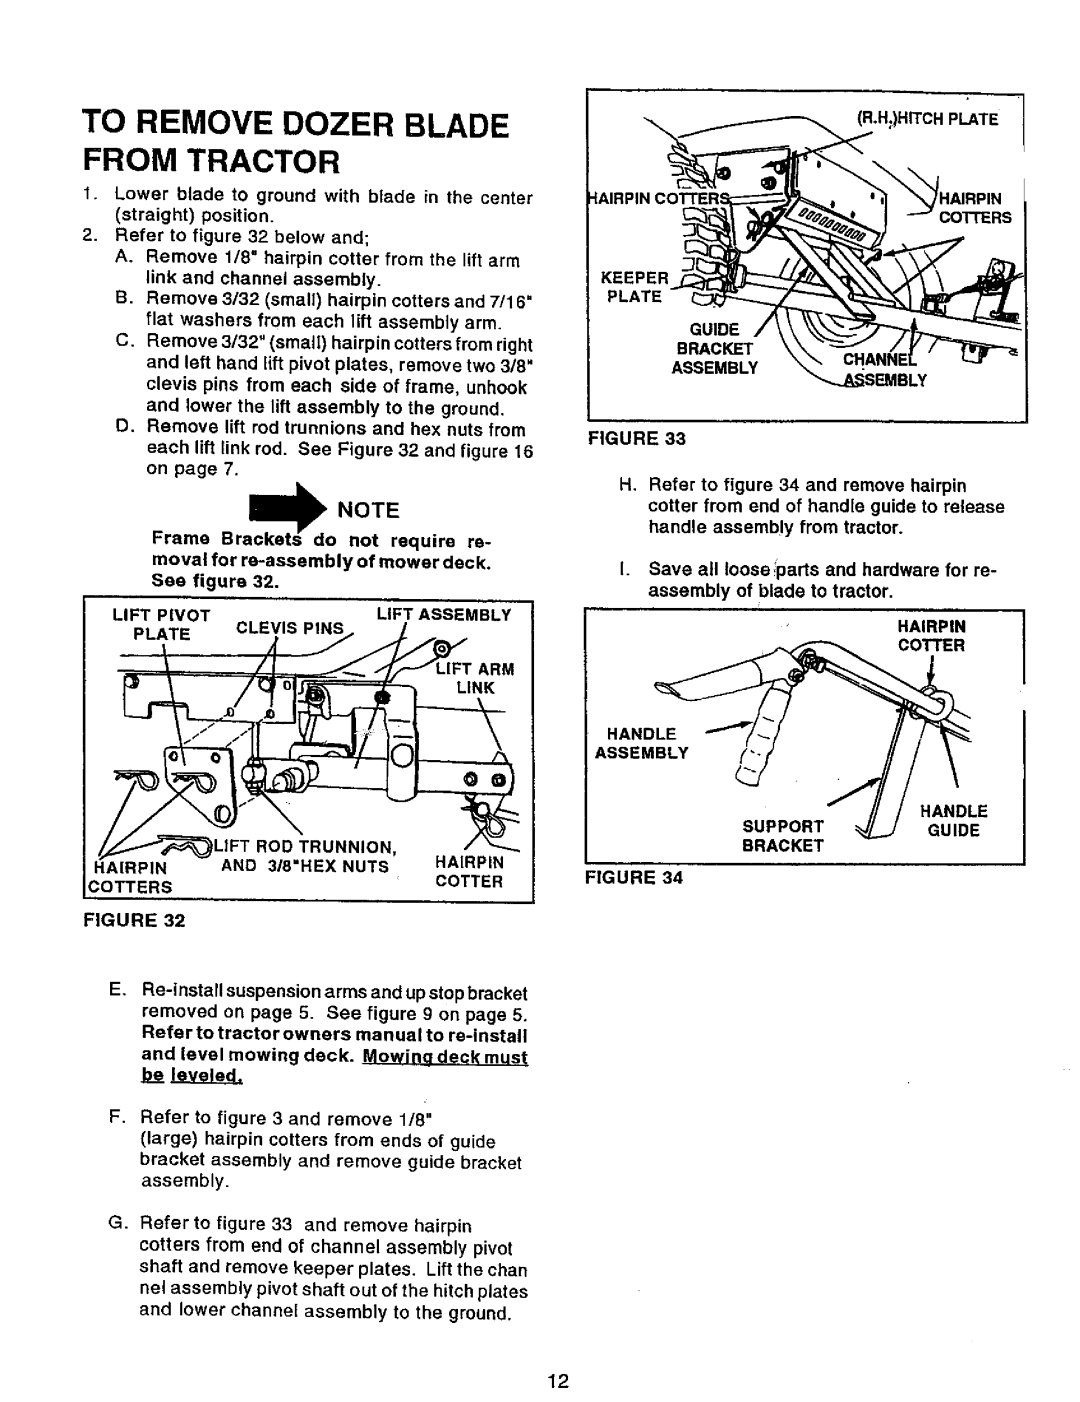 Sears 486.24412 owner manual To Remove Dozer Blade From Tractor, be leveled 